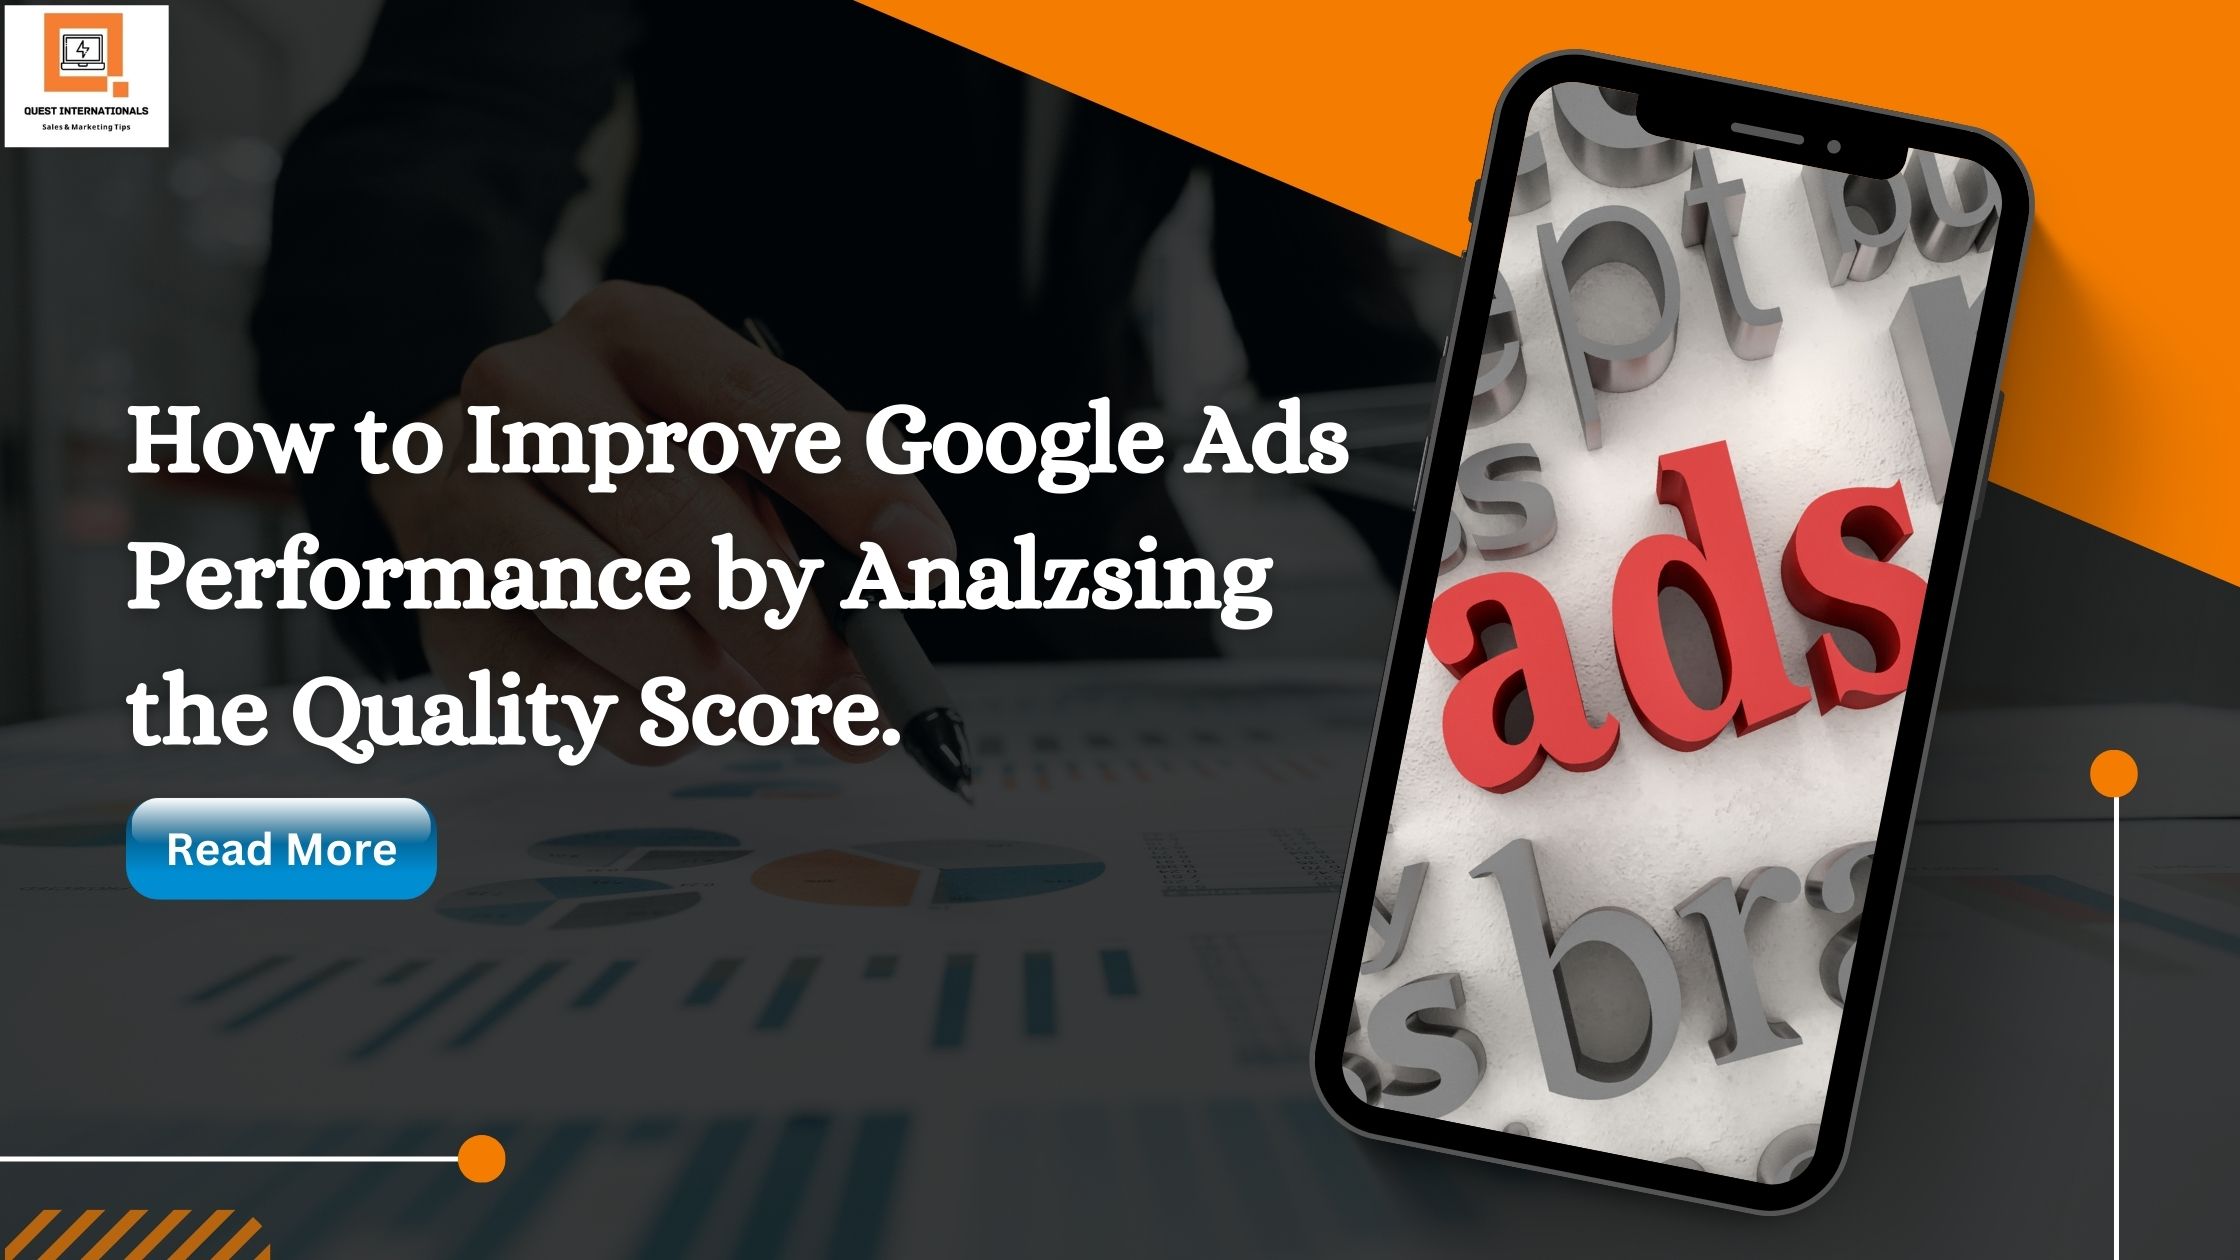 You are currently viewing How to Improve Google Ads Performance by Analyzing the Quality Score.